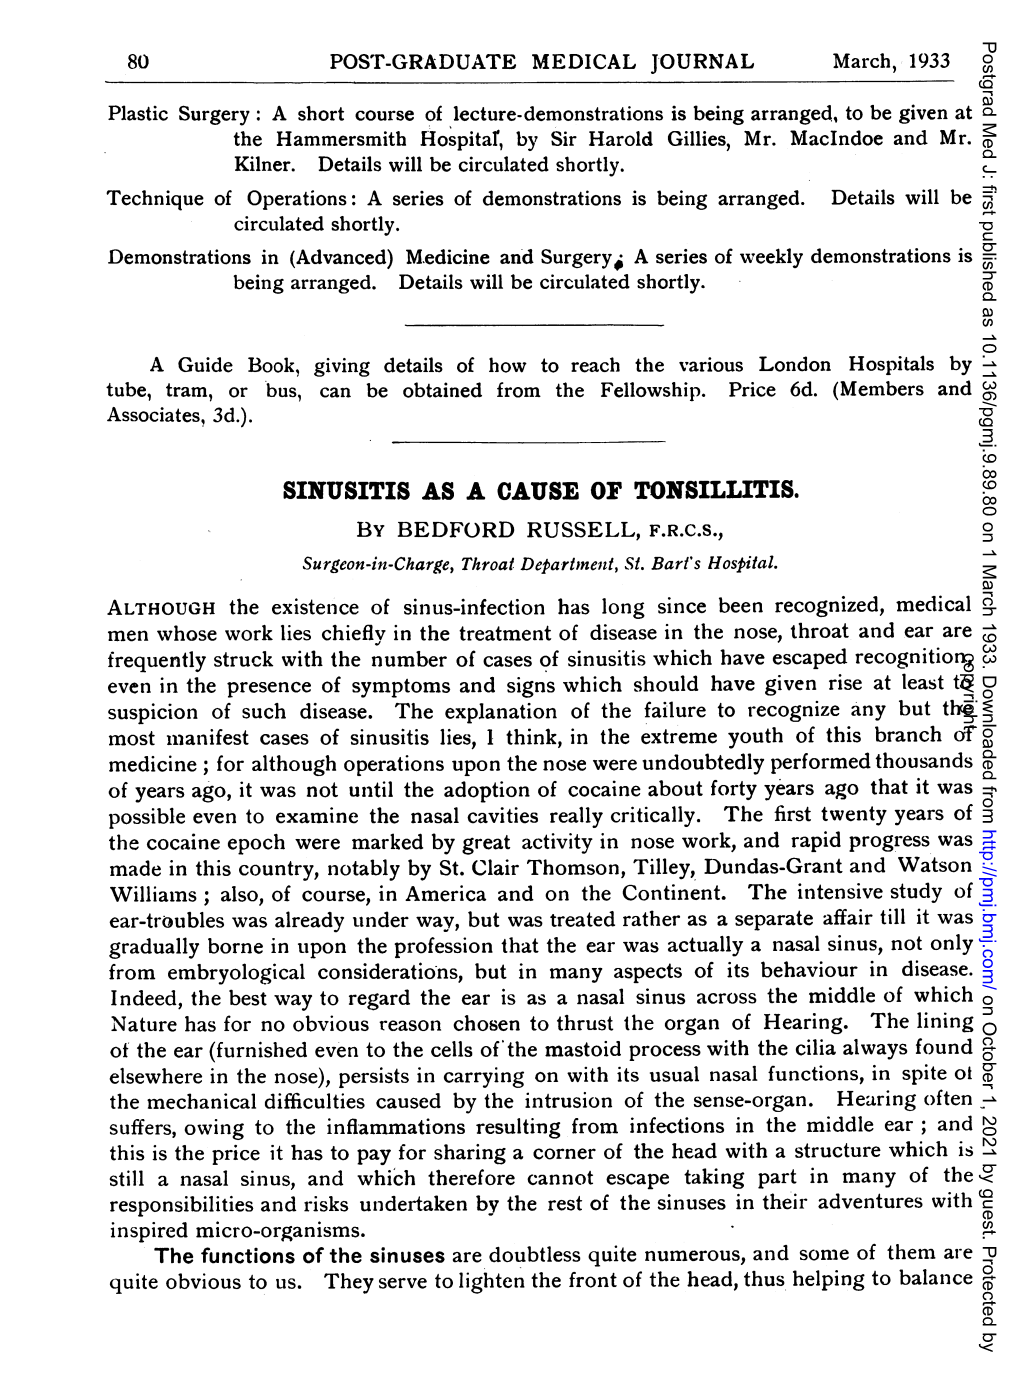 SINUSITIS AS a CAUSE of TONSILLITIS. by BEDFORD RUSSELL, F.R.C.S., Surgeon-In-Charge, Throat Departmentt, St